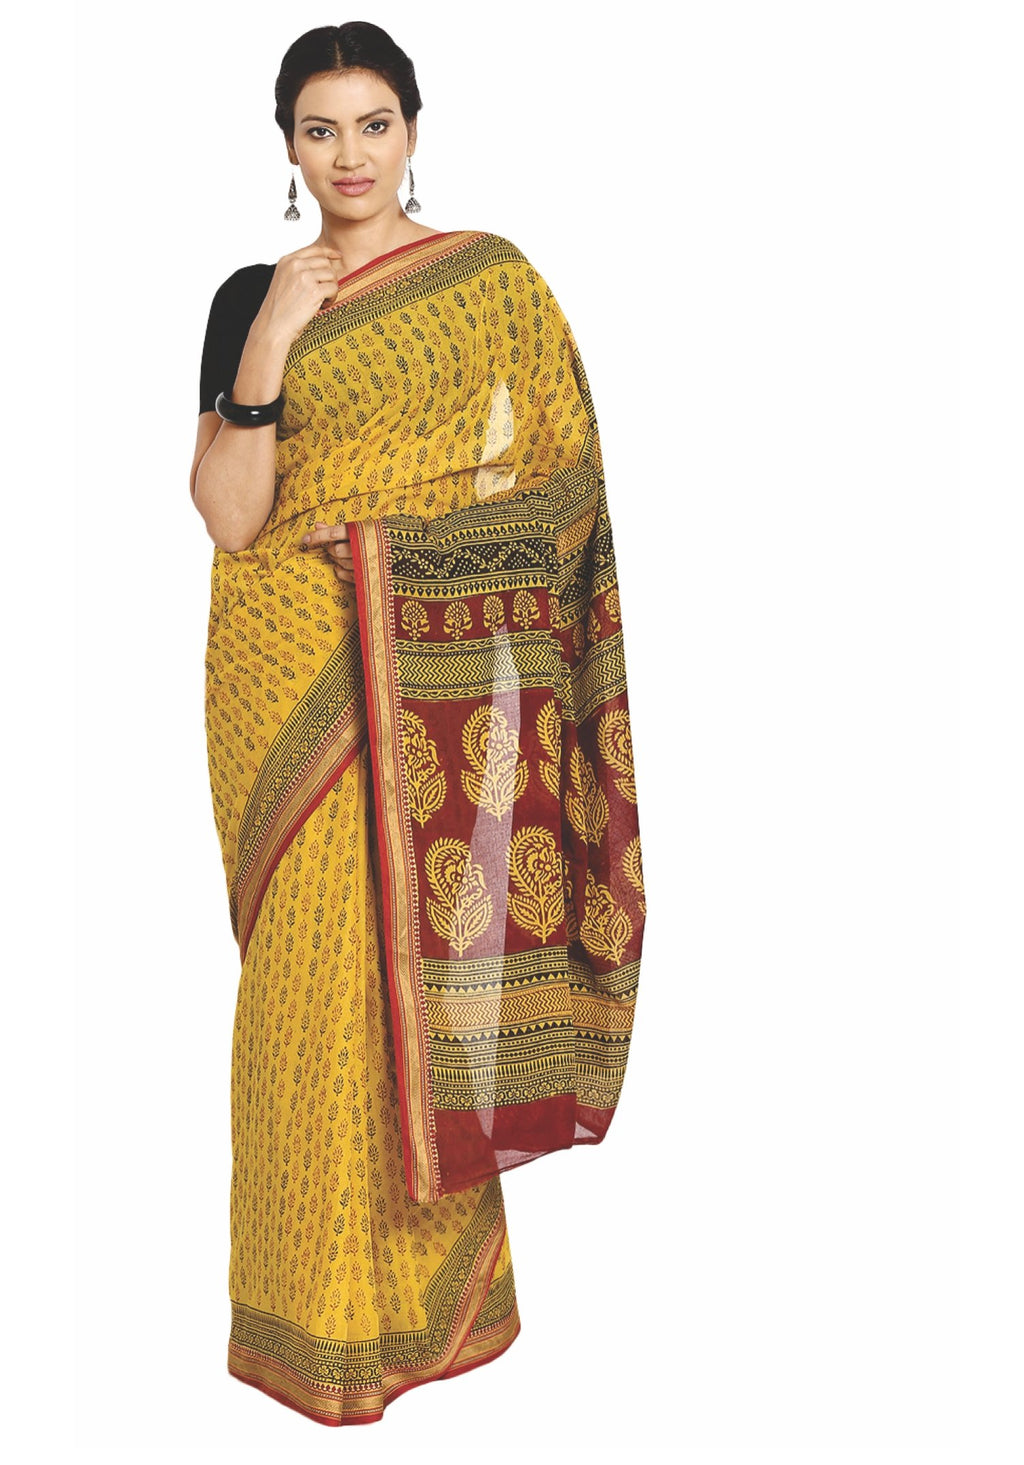 Yellow Cotton Hand Block Bagh Print Handcrafted Saree-Saree-Kalakari India-ZIBASA0059-Bagh, Cotton, Geographical Indication, Hand Blocks, Hand Crafted, Heritage Prints, Natural Dyes, Sarees, Sustainable Fabrics-[Linen,Ethnic,wear,Fashionista,Handloom,Handicraft,Indigo,blockprint,block,print,Cotton,Chanderi,Blue, latest,classy,party,bollywood,trendy,summer,style,traditional,formal,elegant,unique,style,hand,block,print, dabu,booti,gift,present,glamorous,affordable,collectible,Sari,Saree,printed, h